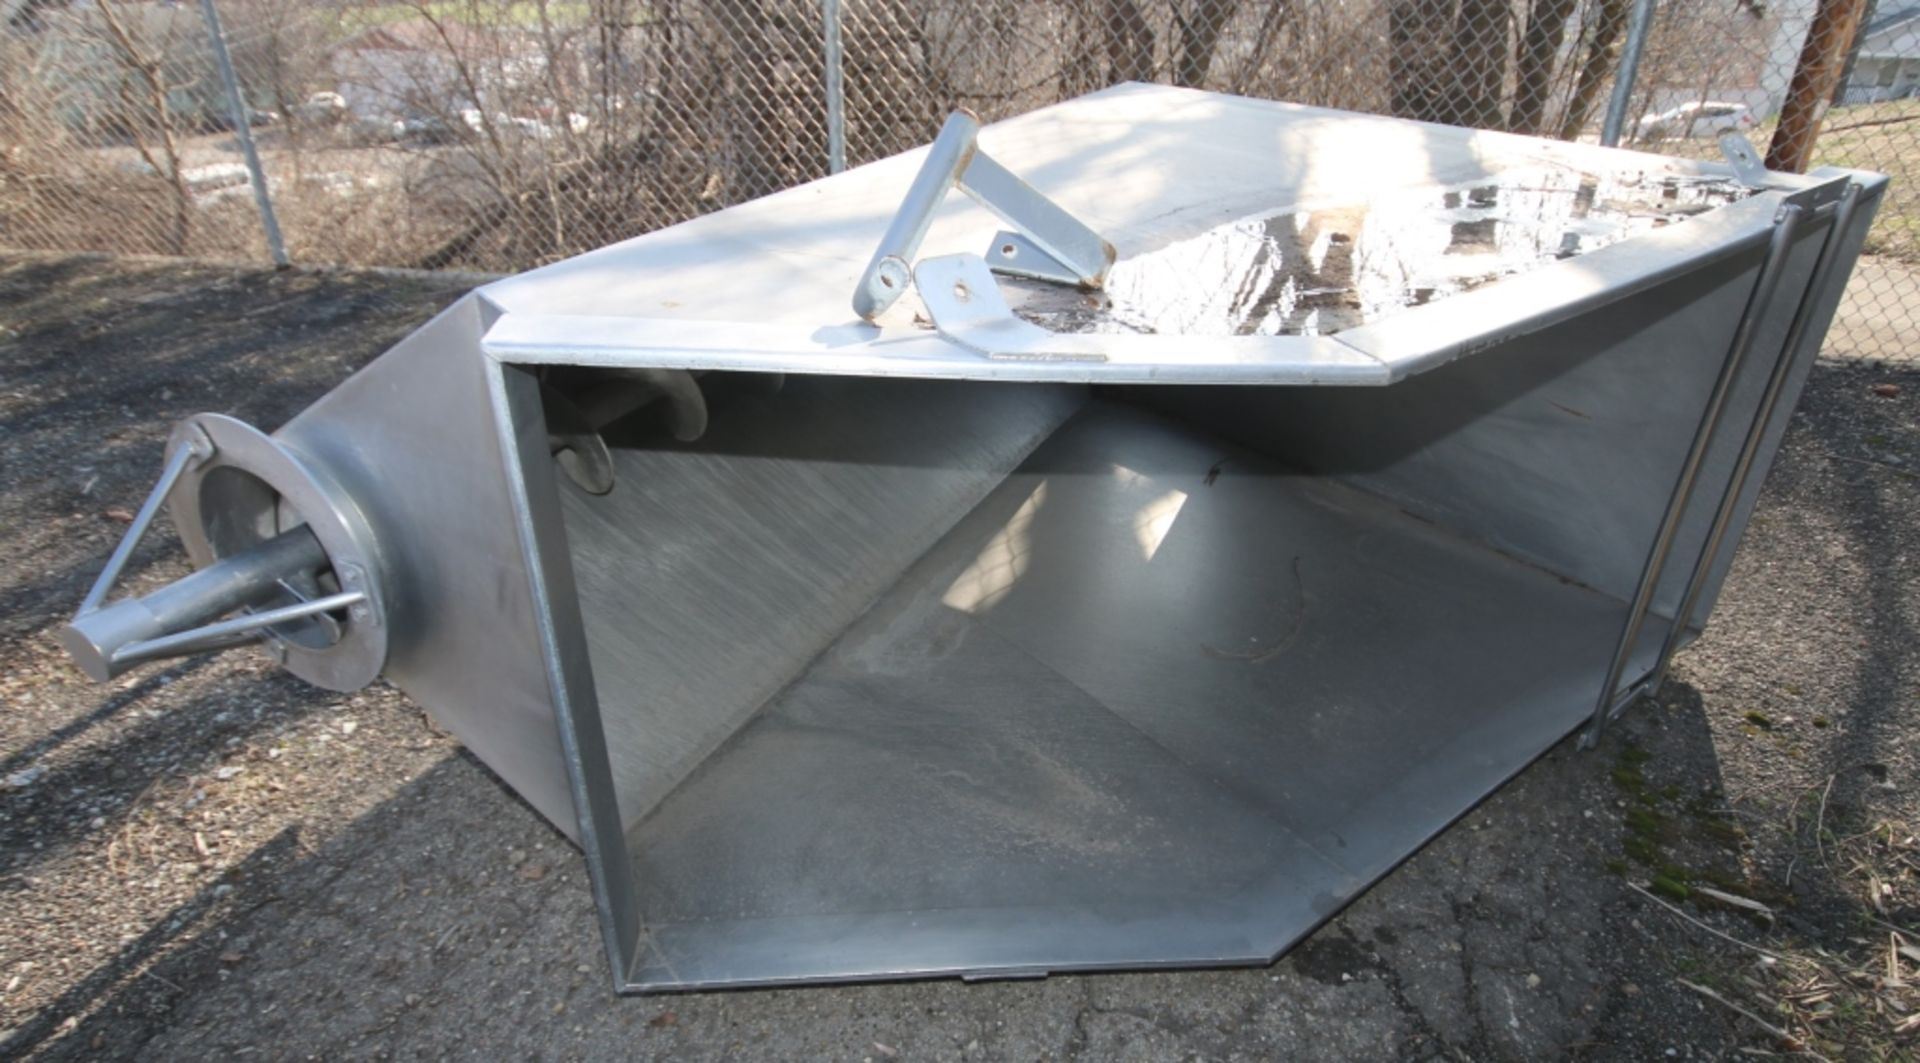 Aprox. 8 ft L x 37" W x 90" H S/S Auger Box with 12" S/S Auger (INV#77749)(Located @ the MDG - Image 2 of 4